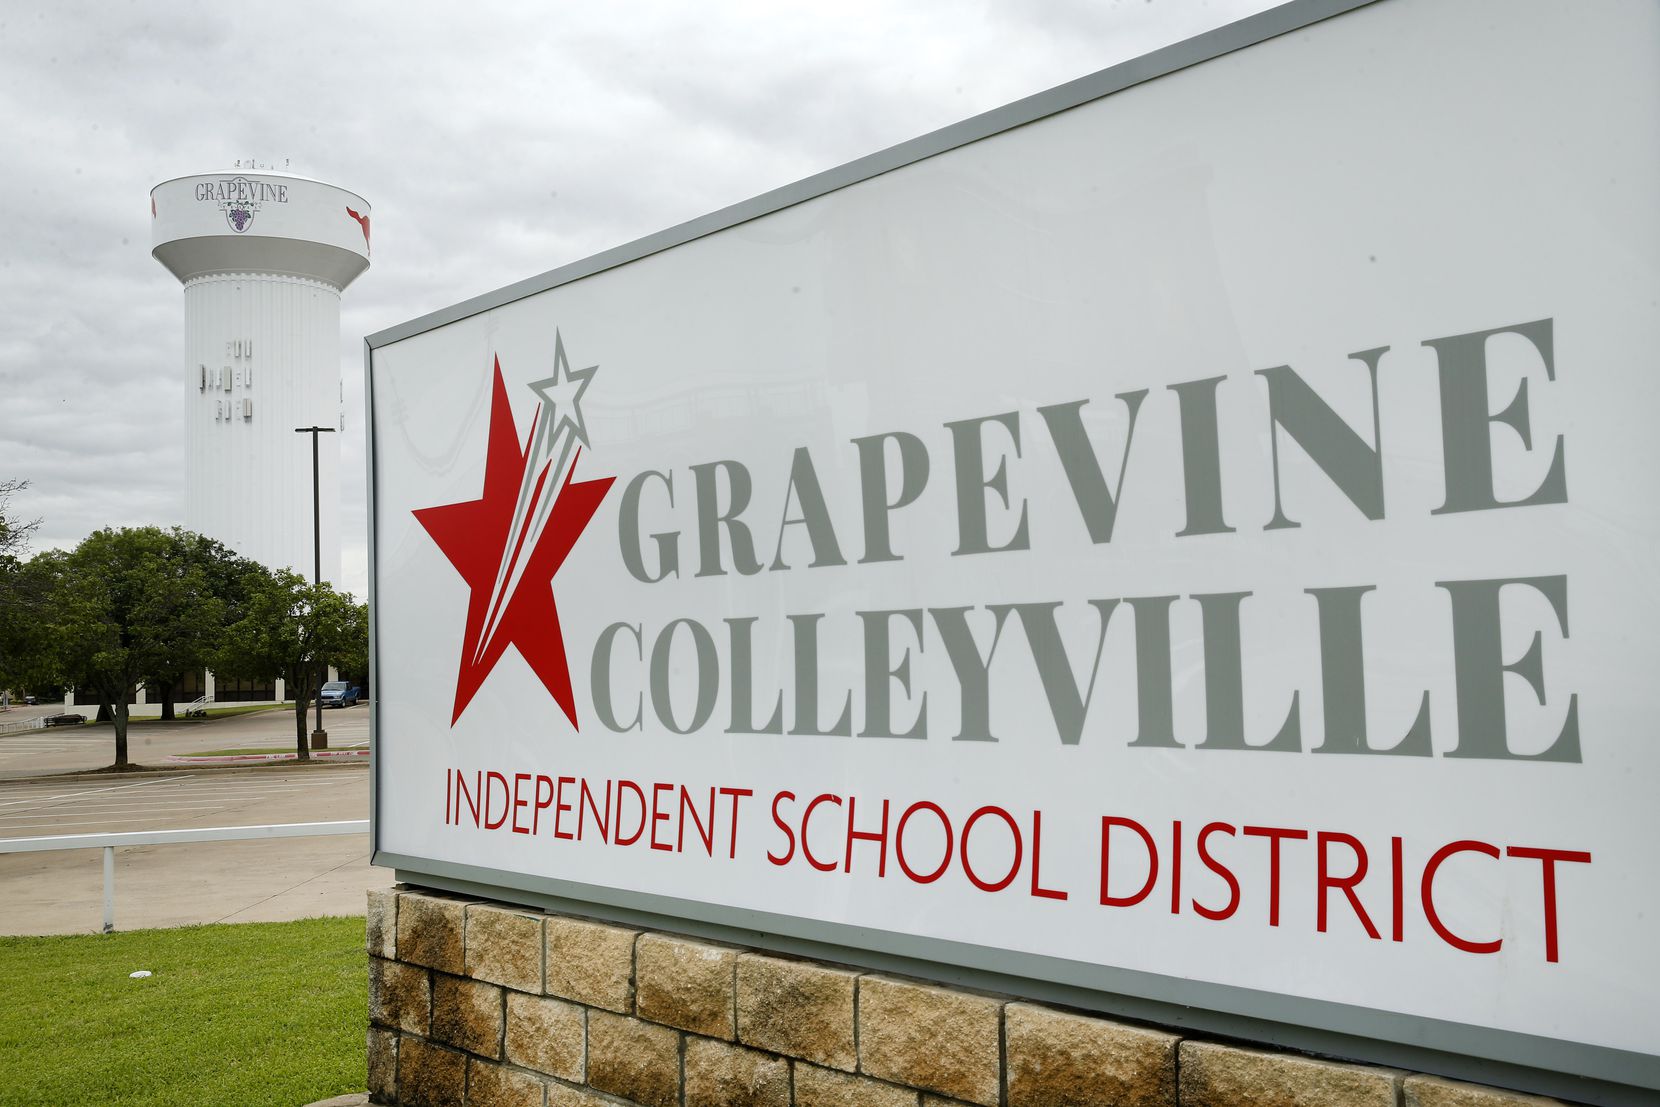 The latest COVID-19 surge caused by the omicron variant has caused a substitute teacher shortage in Grapevine-Colleyville Independent School District.